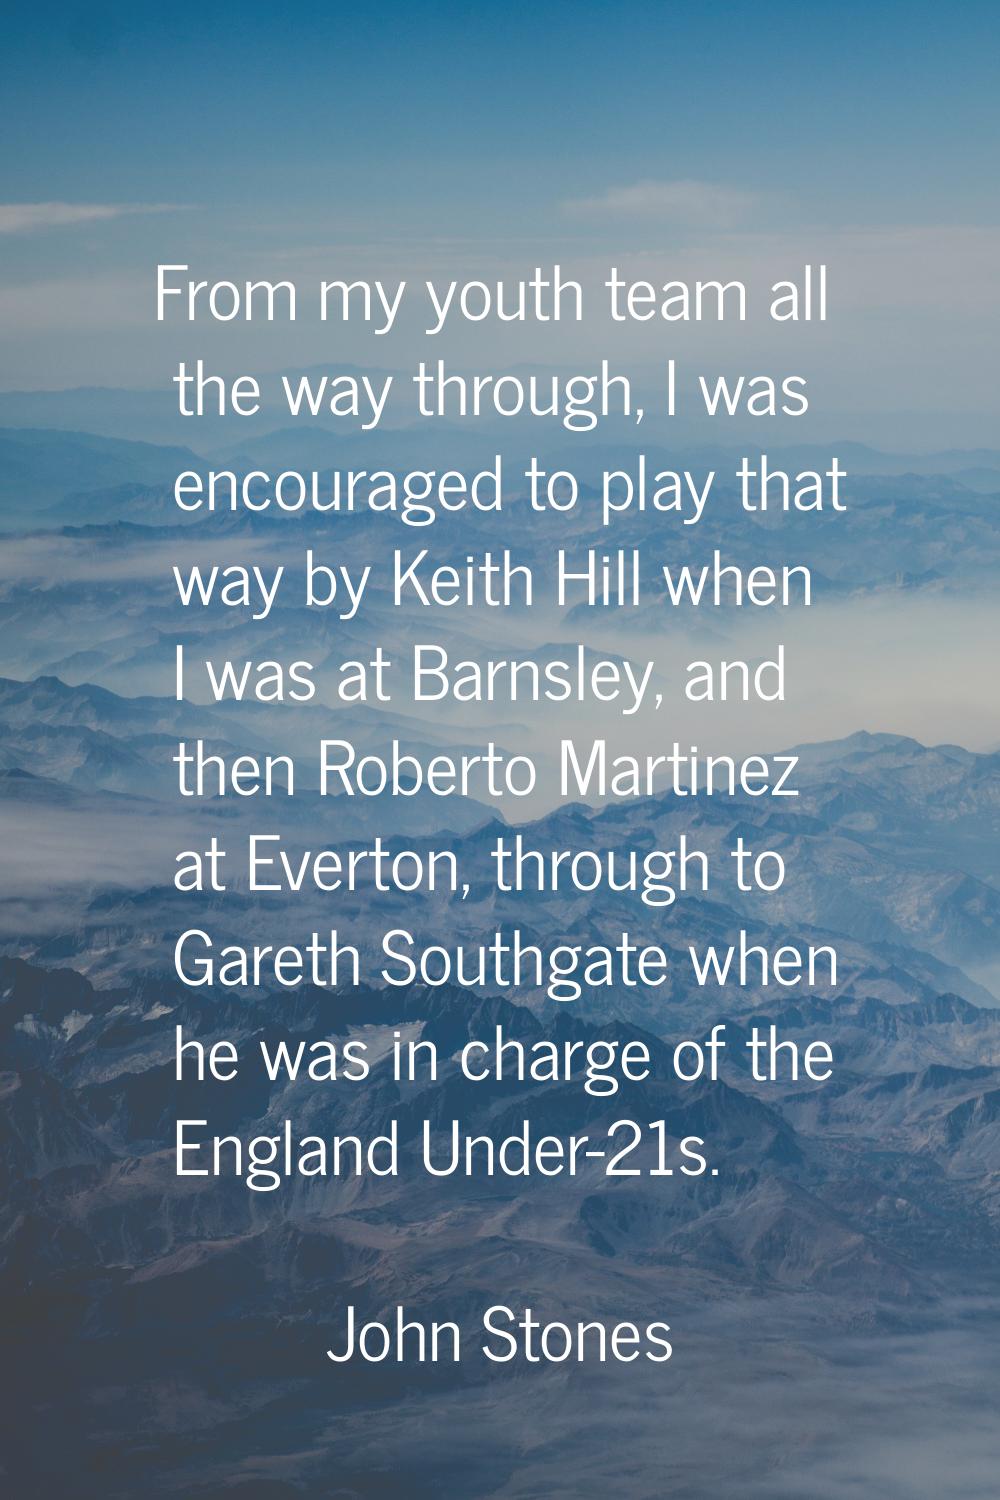 From my youth team all the way through, I was encouraged to play that way by Keith Hill when I was 